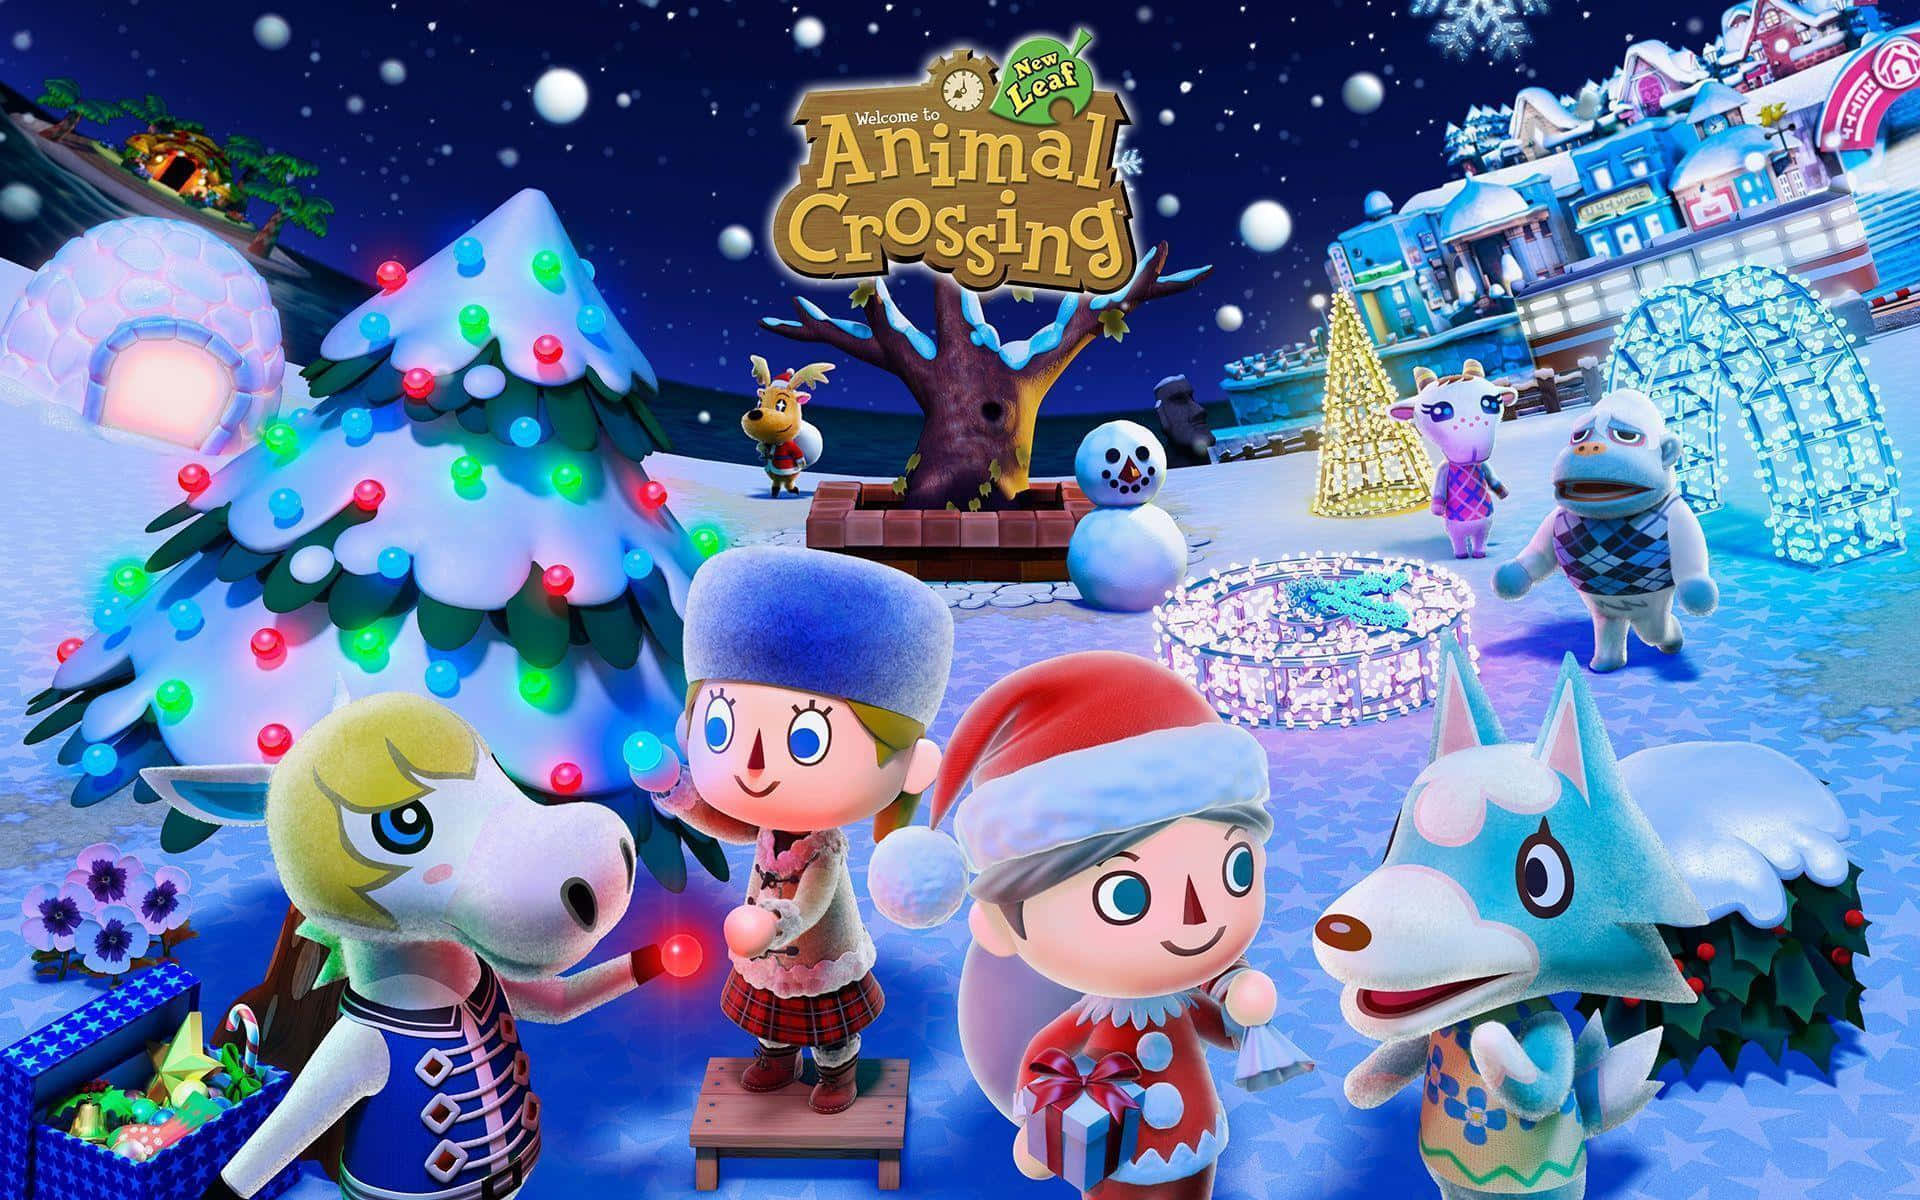 Welcome to Animal Crossing - where the fun never ends!